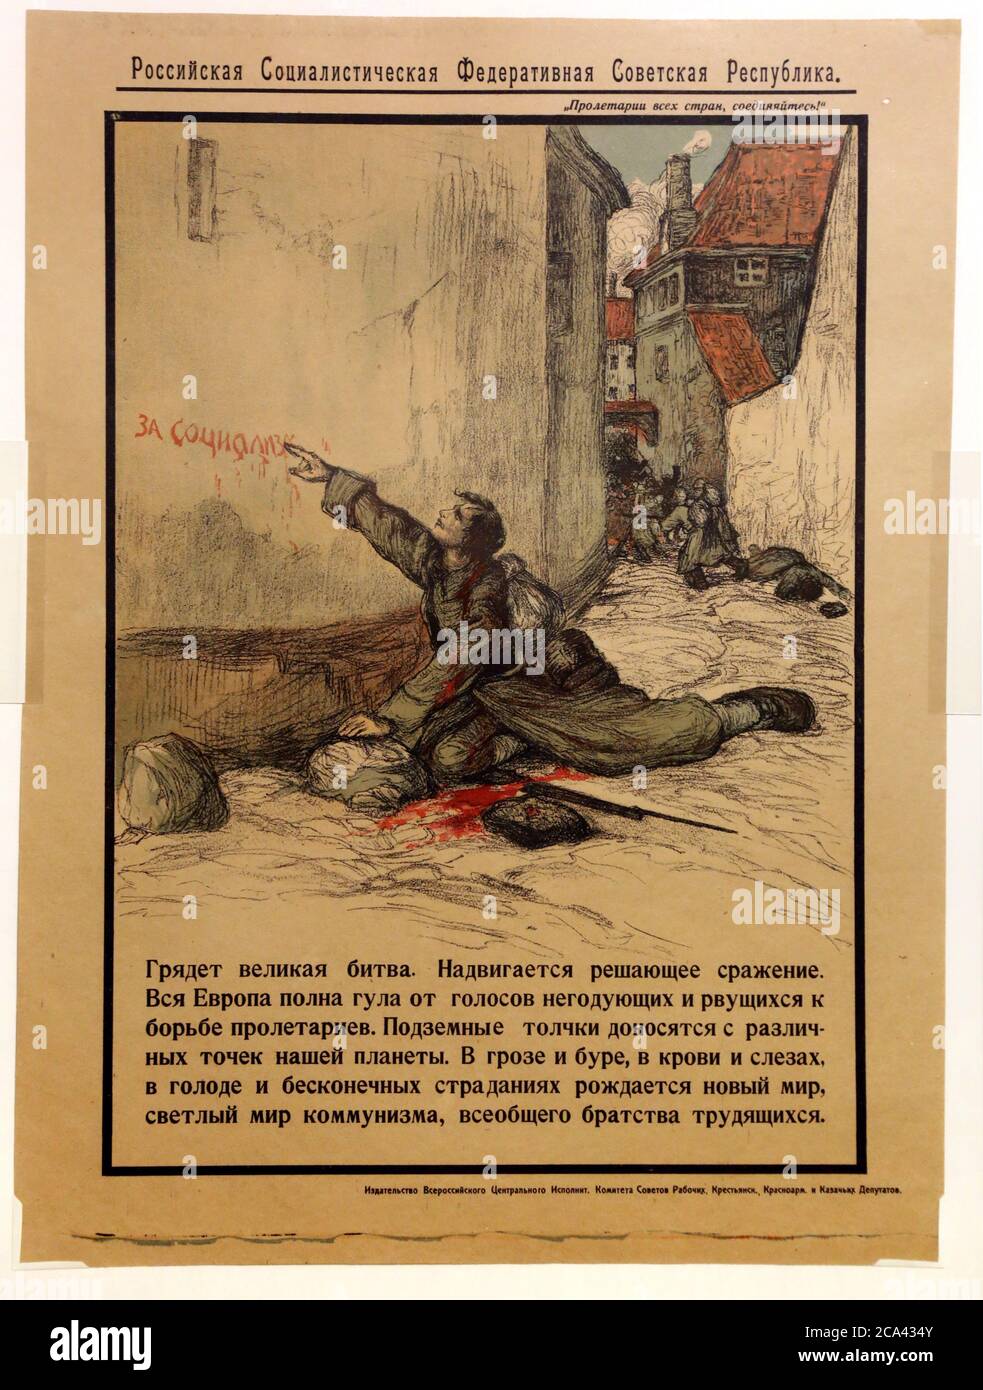 The 1920 Polish-Soviet war propaganda poster. Soviet poster 'For socialism!' (the writing with blood on the wall). Artist unknown. Stock Photo